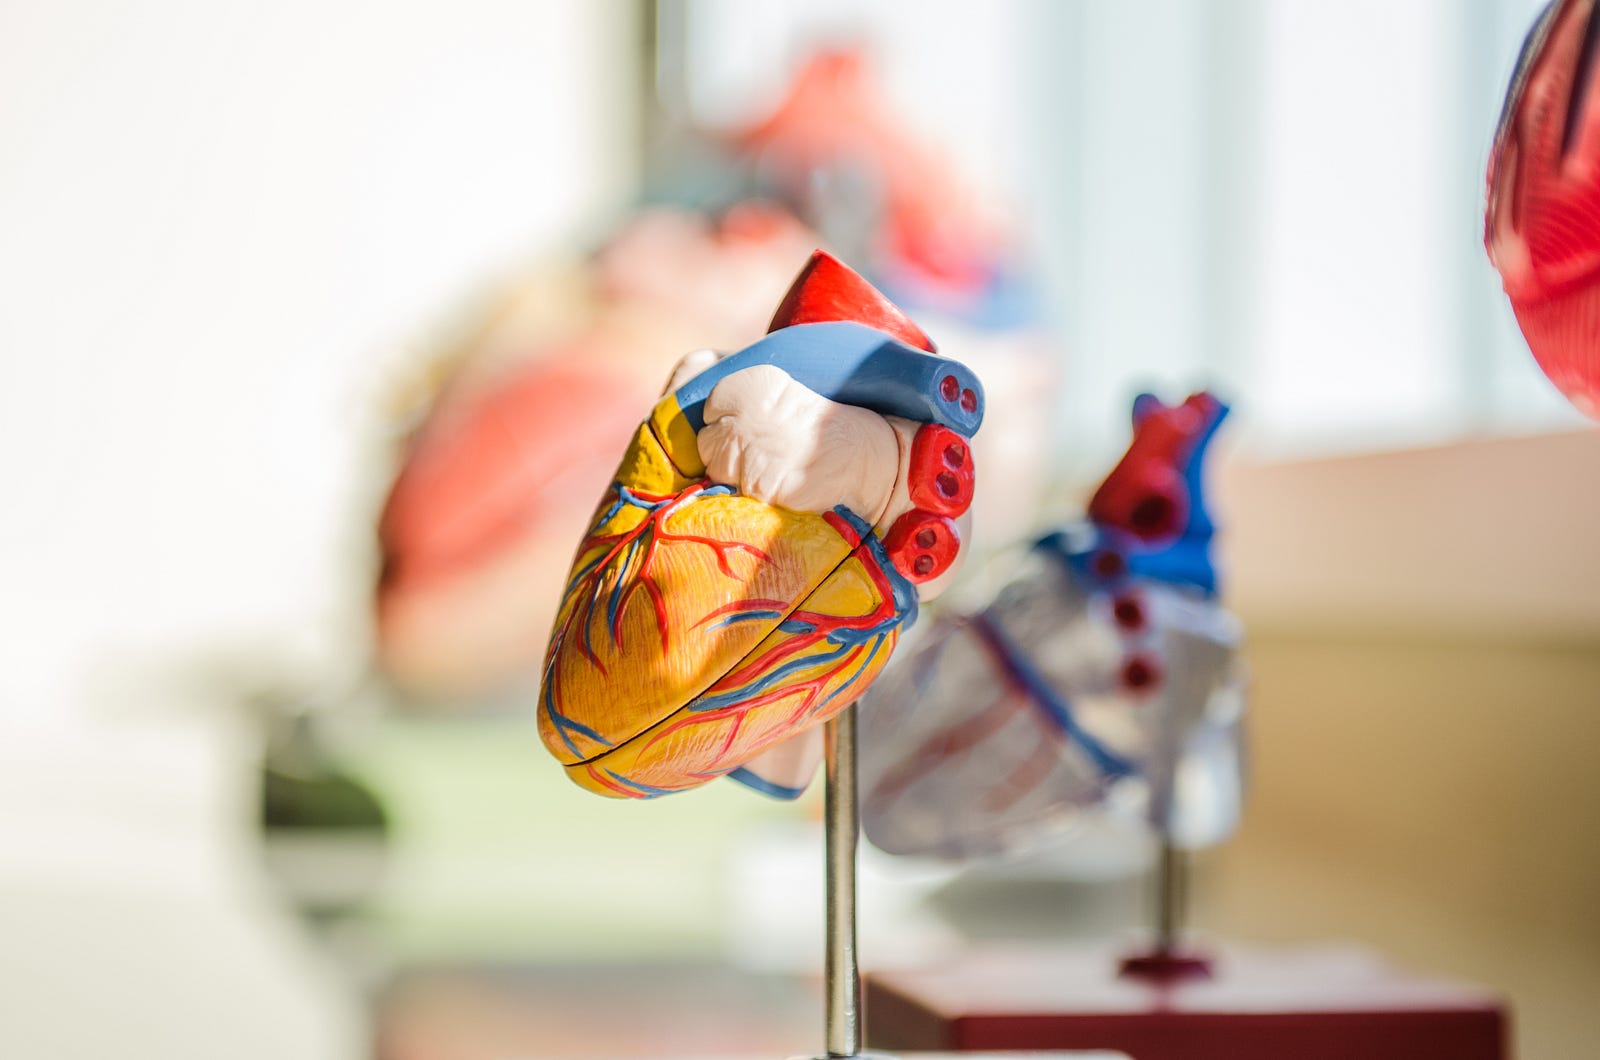 Colorful anatomic model of a heart. Compared with seven hours of sleep, each one-hour decrease in sleep amount was associated with a six percent increase in the risk of all-cause mortality and heart disease; the less sleep one gets below seven hours, the higher the threat of heart disease and early death.